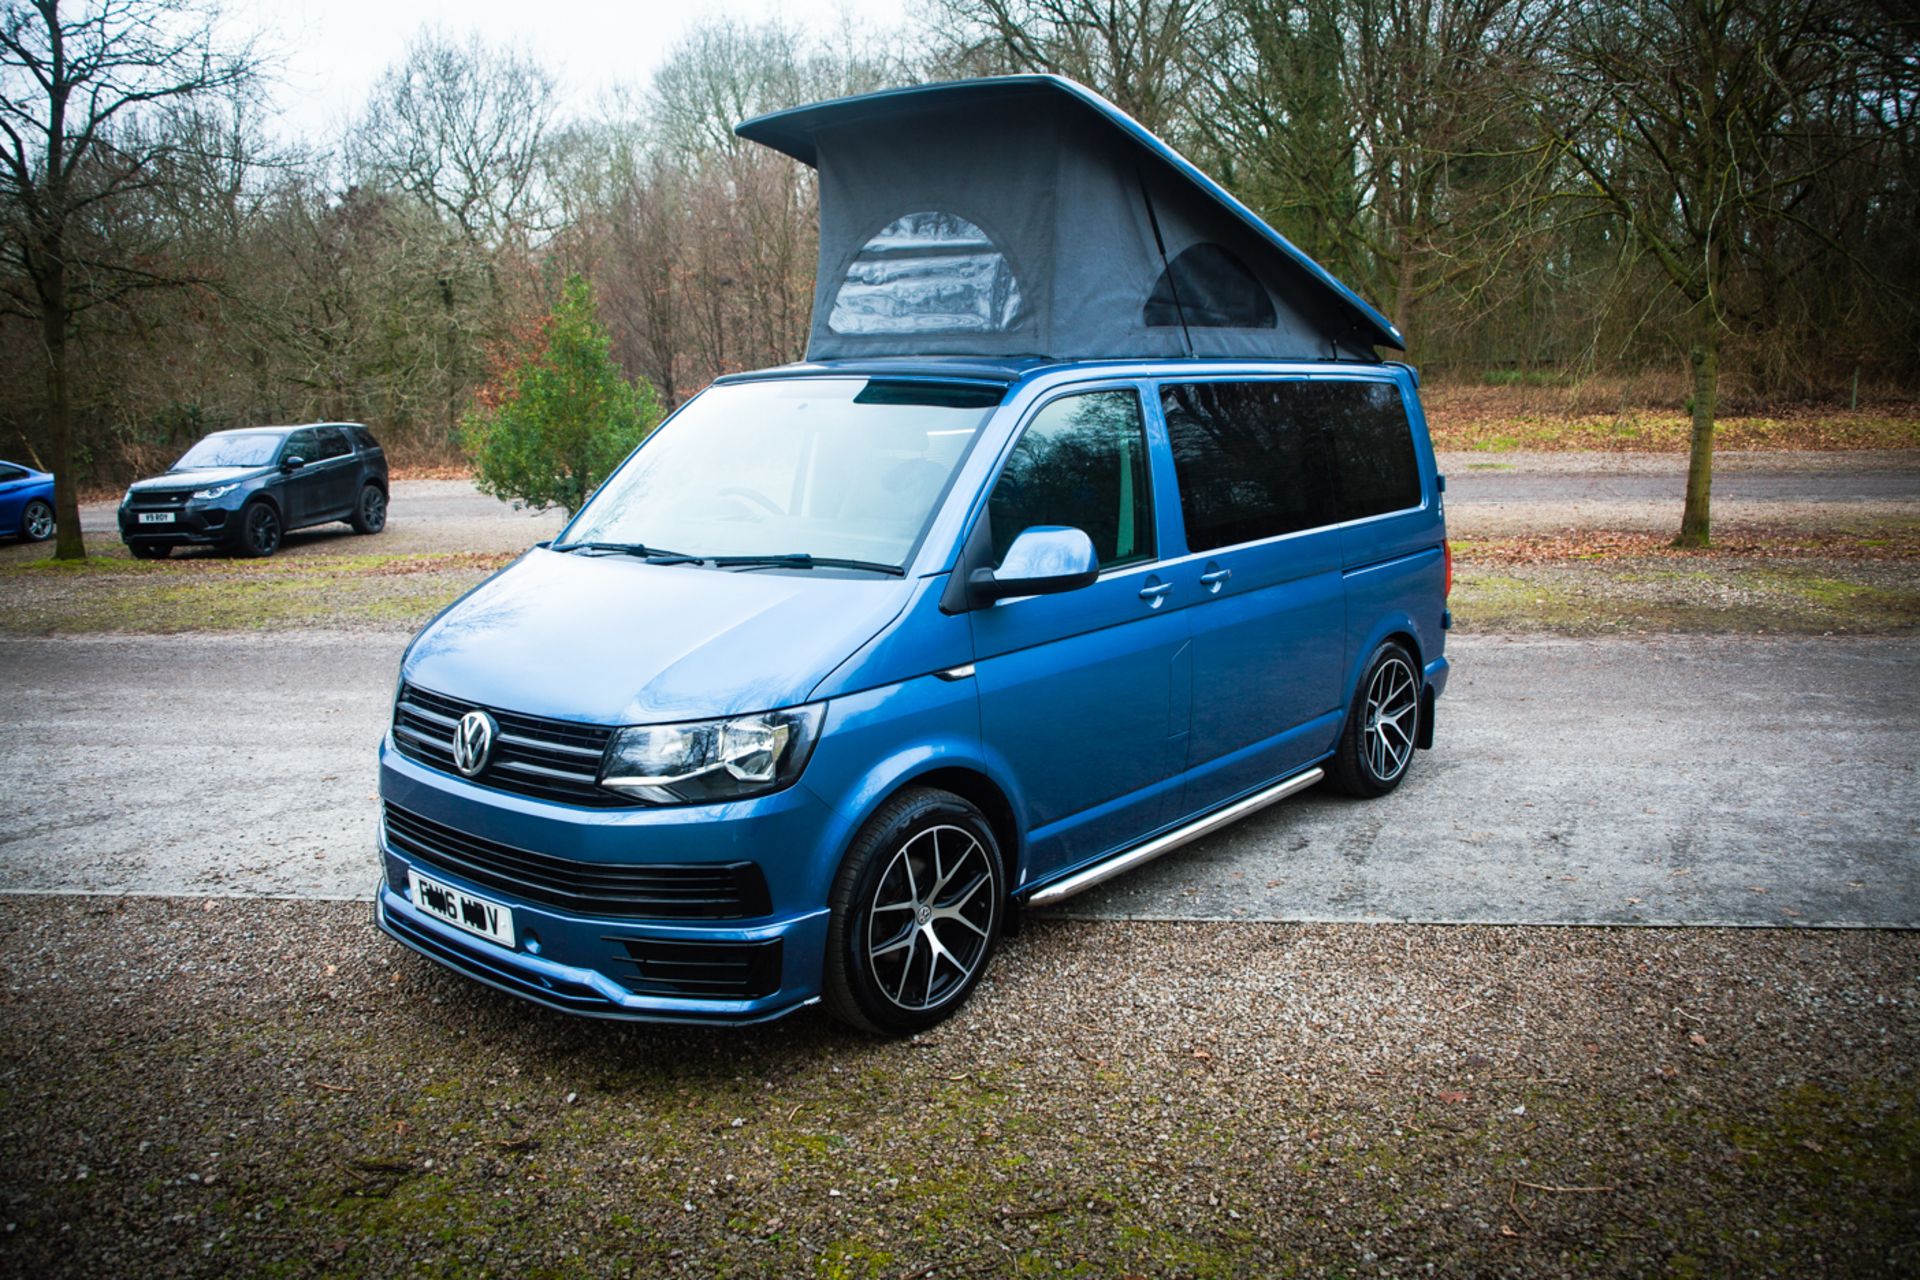 2016 Volkswagen Transporter With Full Unused Camper Conversion - Image 2 of 31